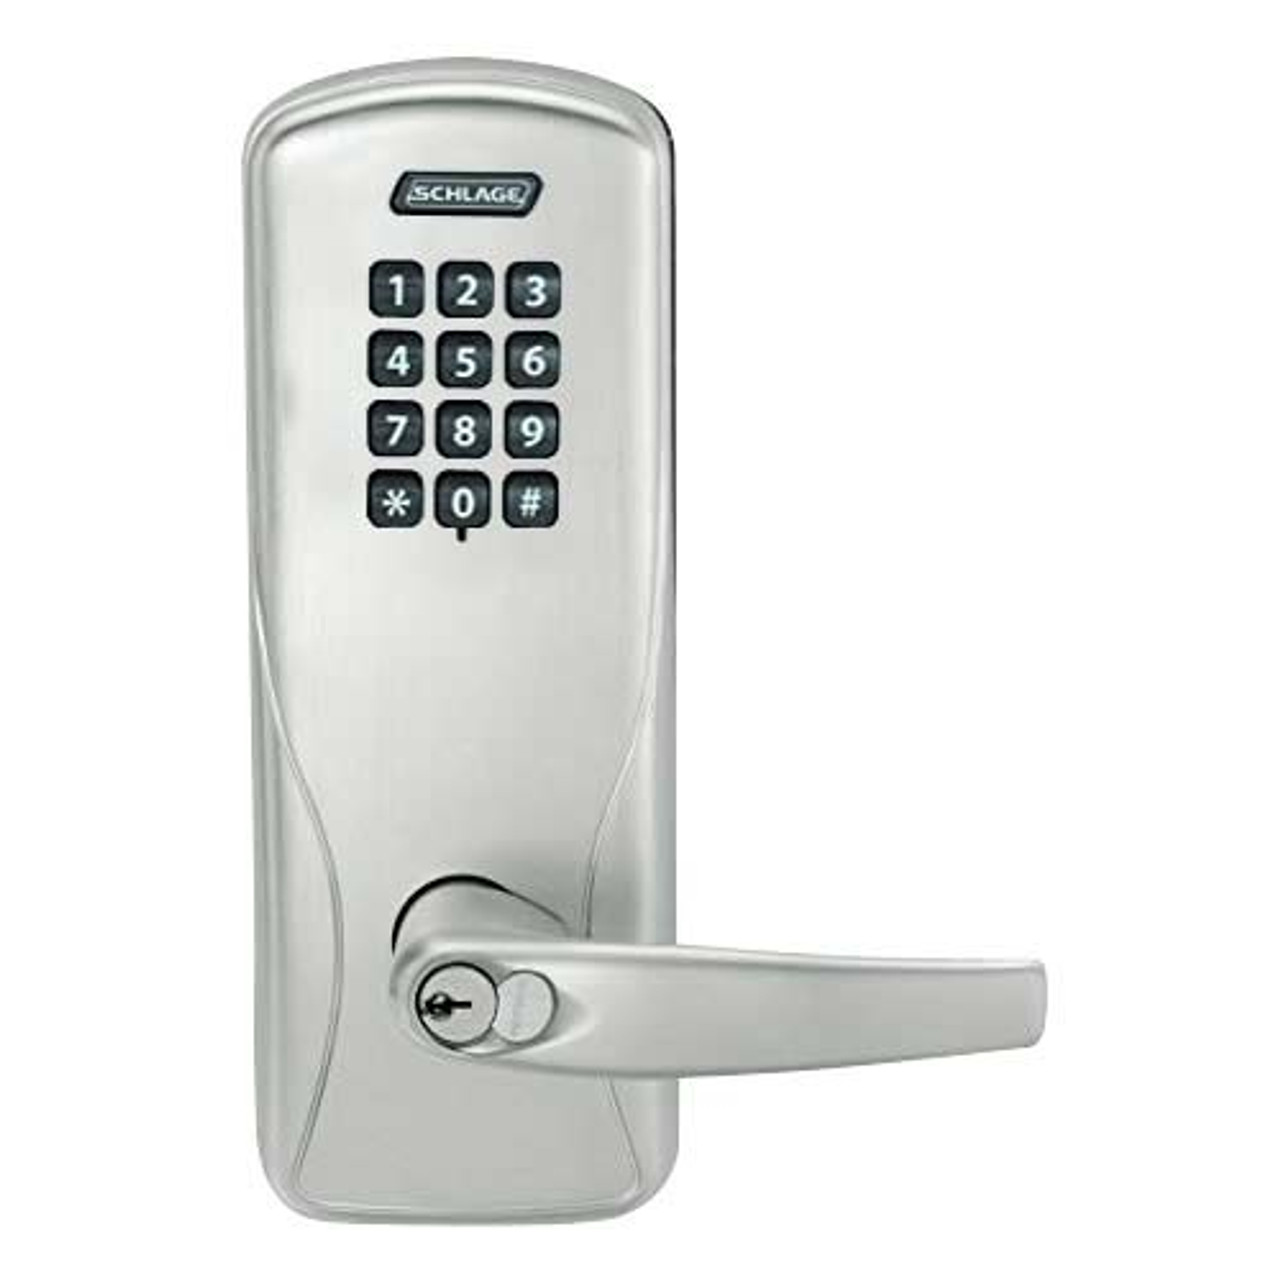 CO200-CY-70-KP-ATH-RD-619 Schlage Standalone Cylindrical Electronic Keypad locks in Satin Nickel